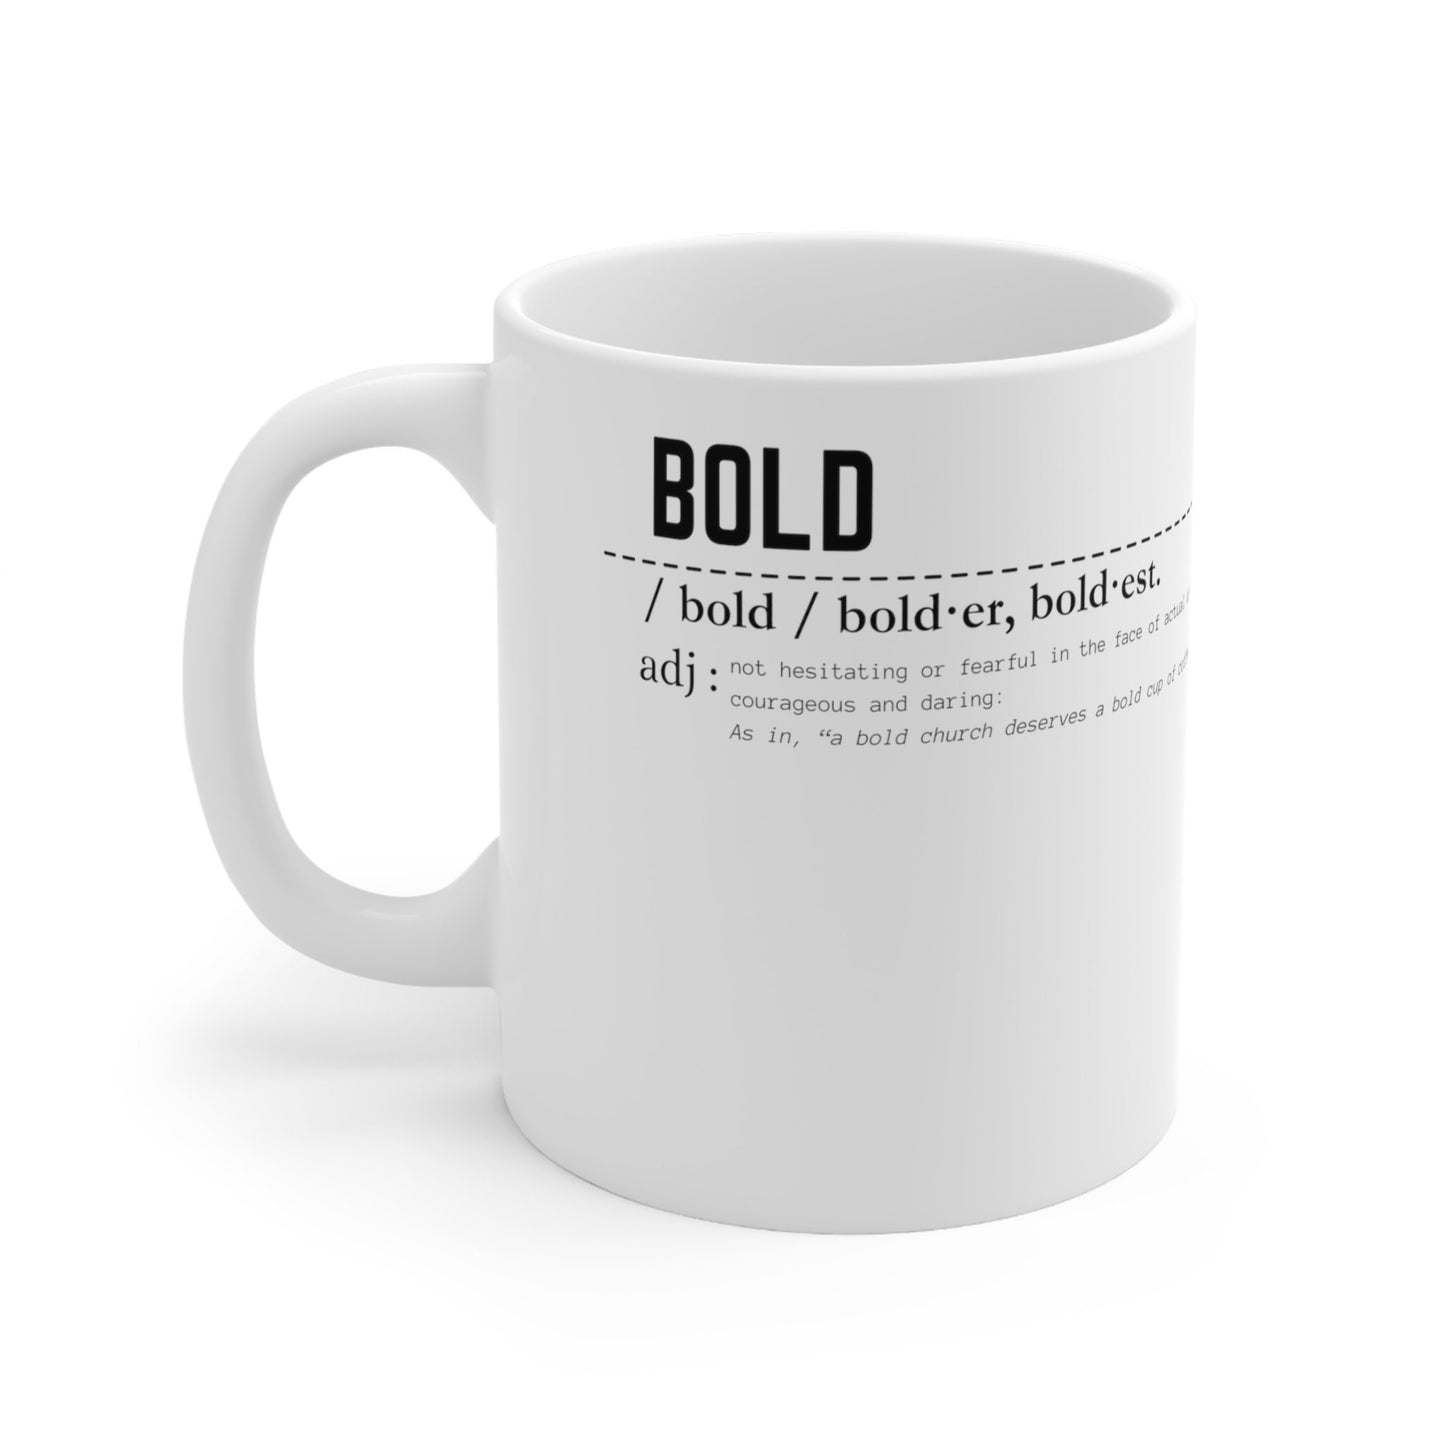 Branded Waters Church Bold Mug 11oz - in Color